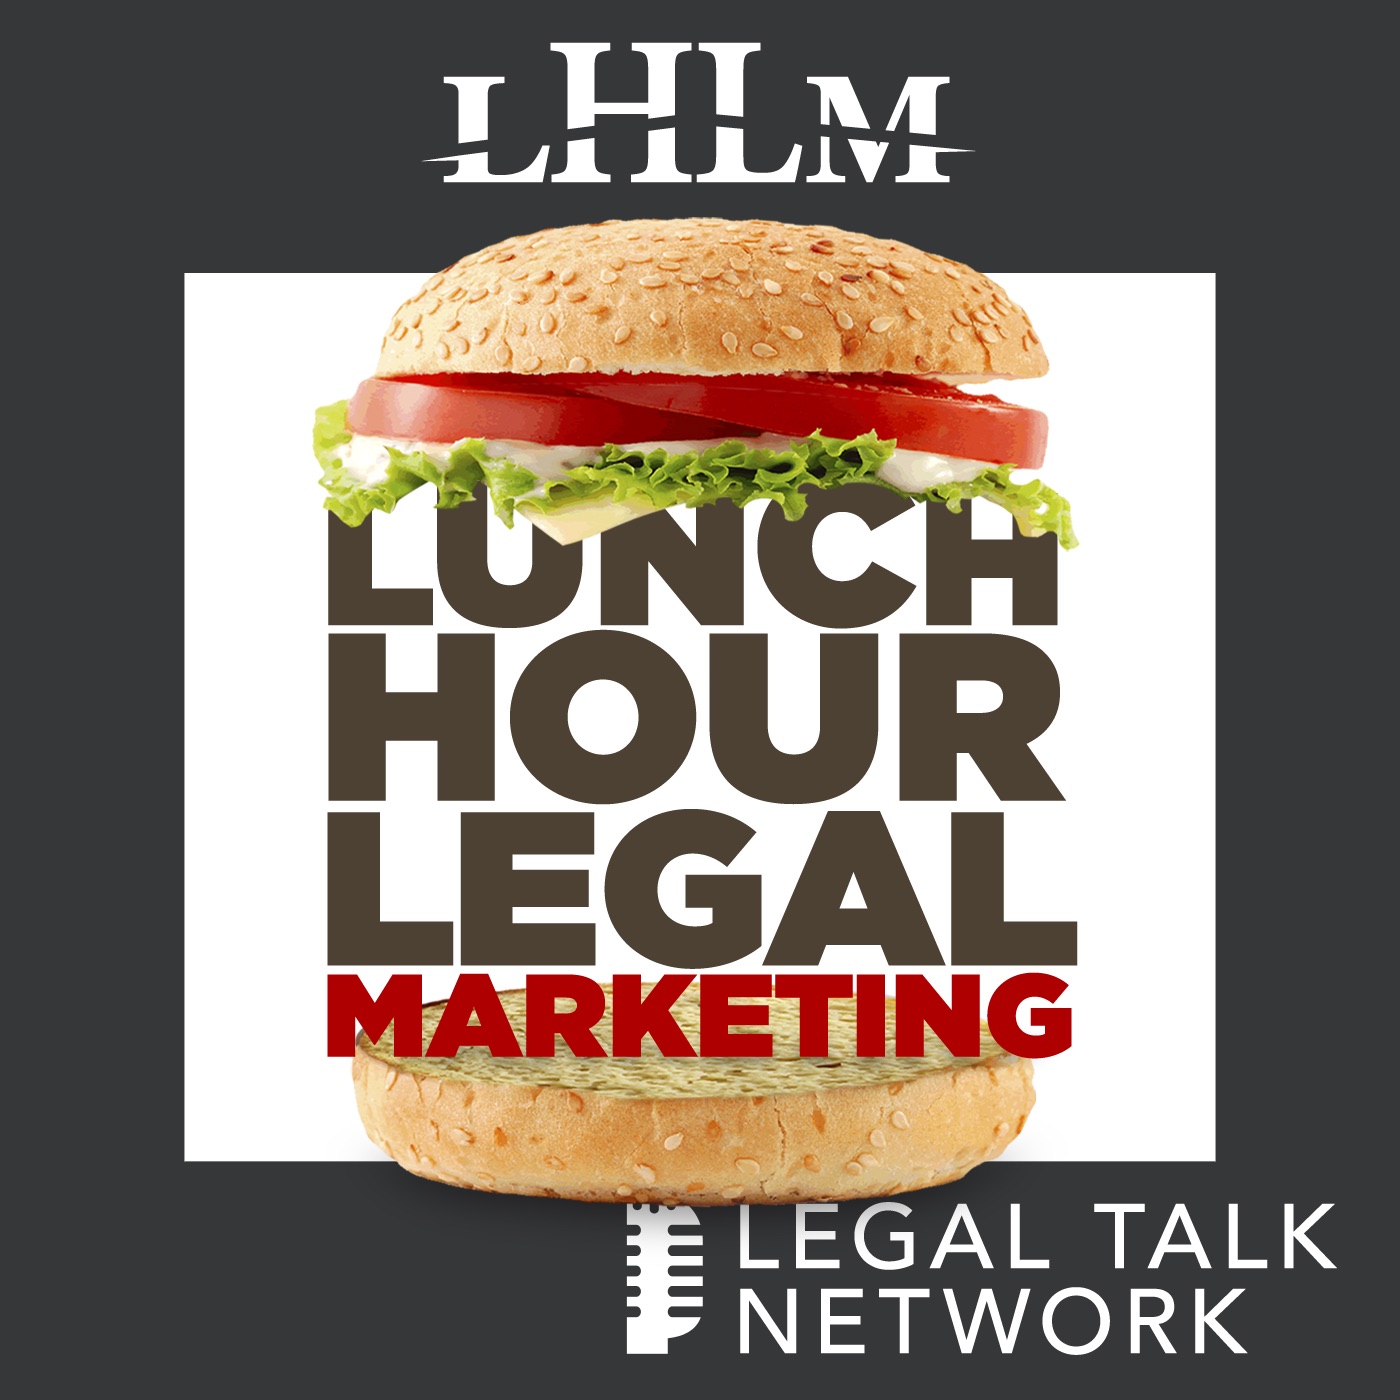 Lunch Hour Legal Marketing Reboot